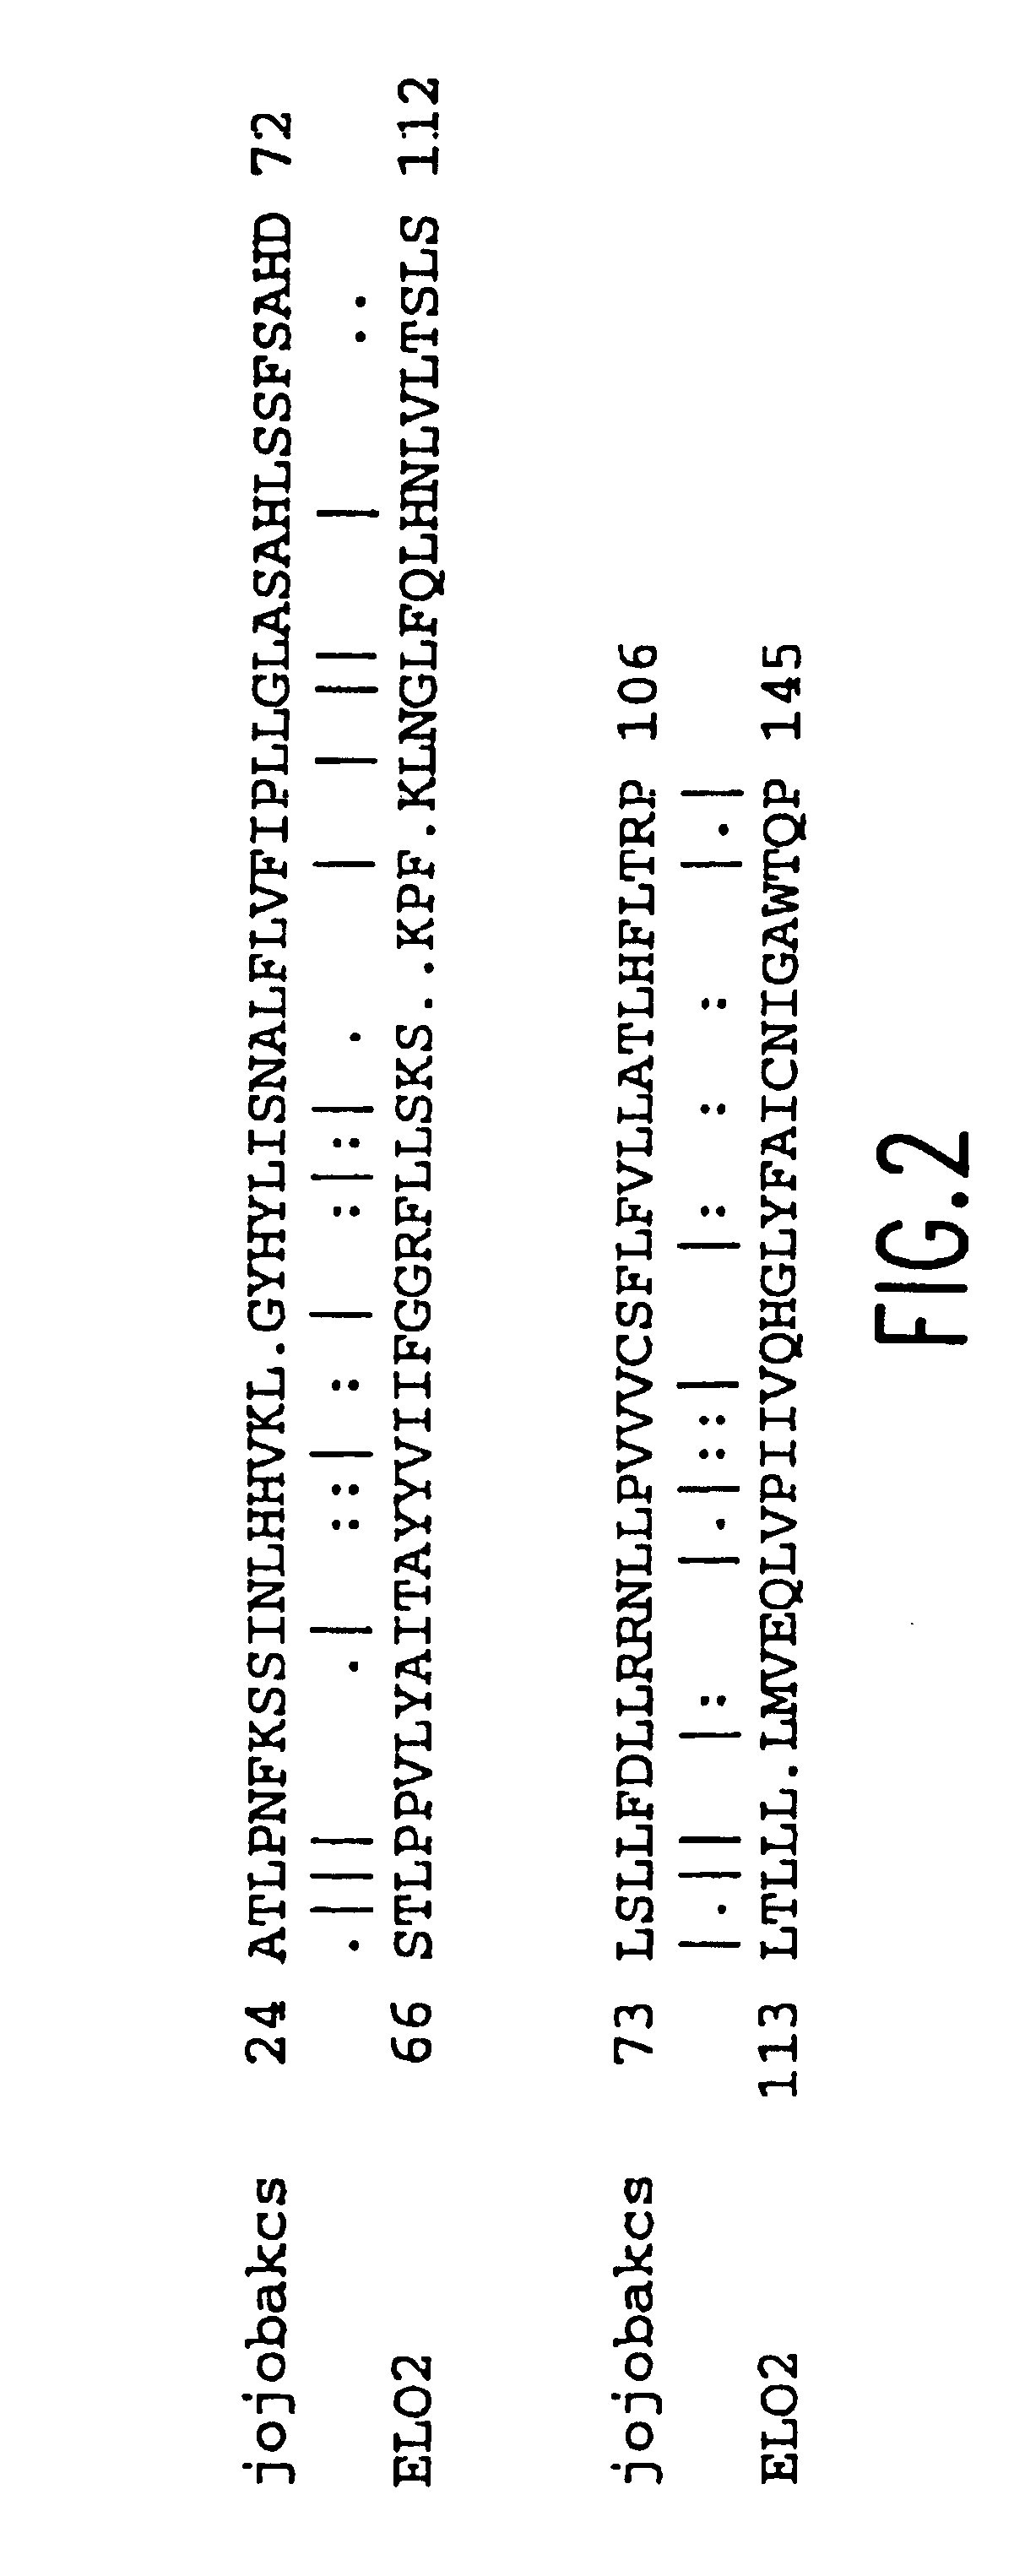 Elongase genes and uses thereof